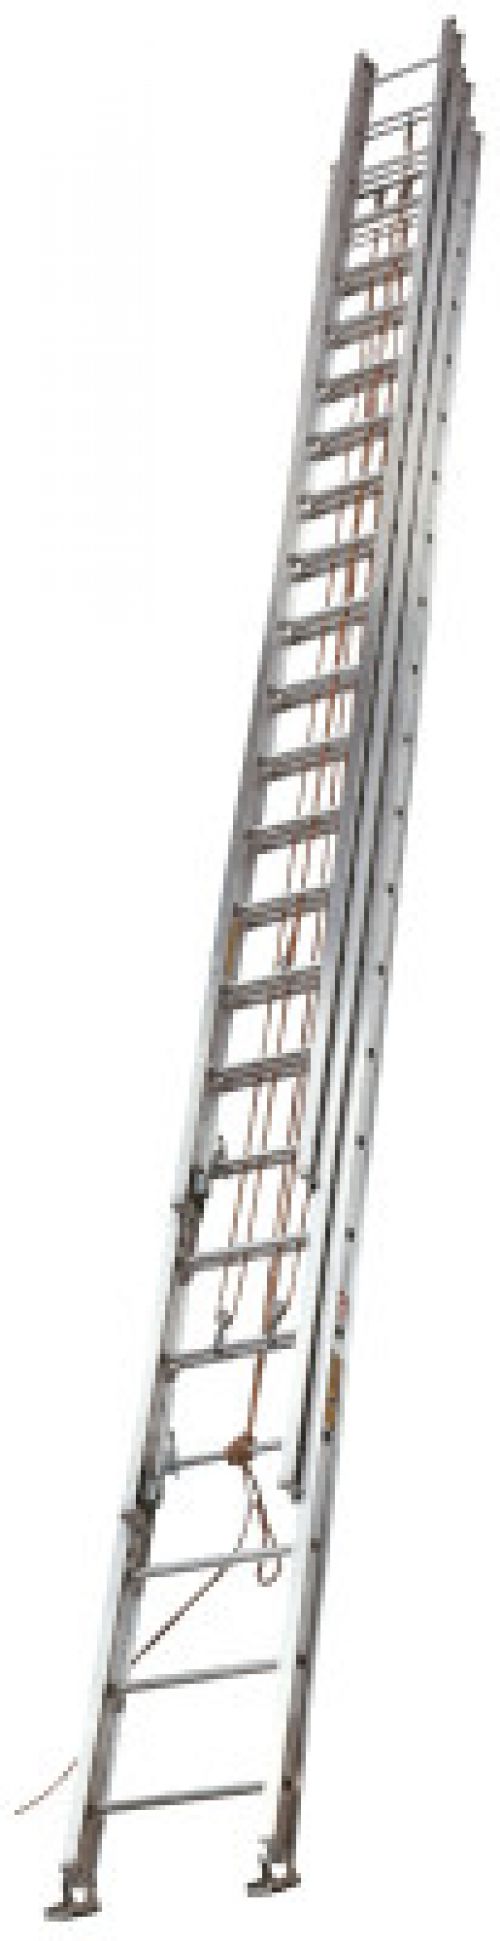 AE1660 Series Aluminum 3-Section Extension Ladders, 60 ft, Class I, 250 lb